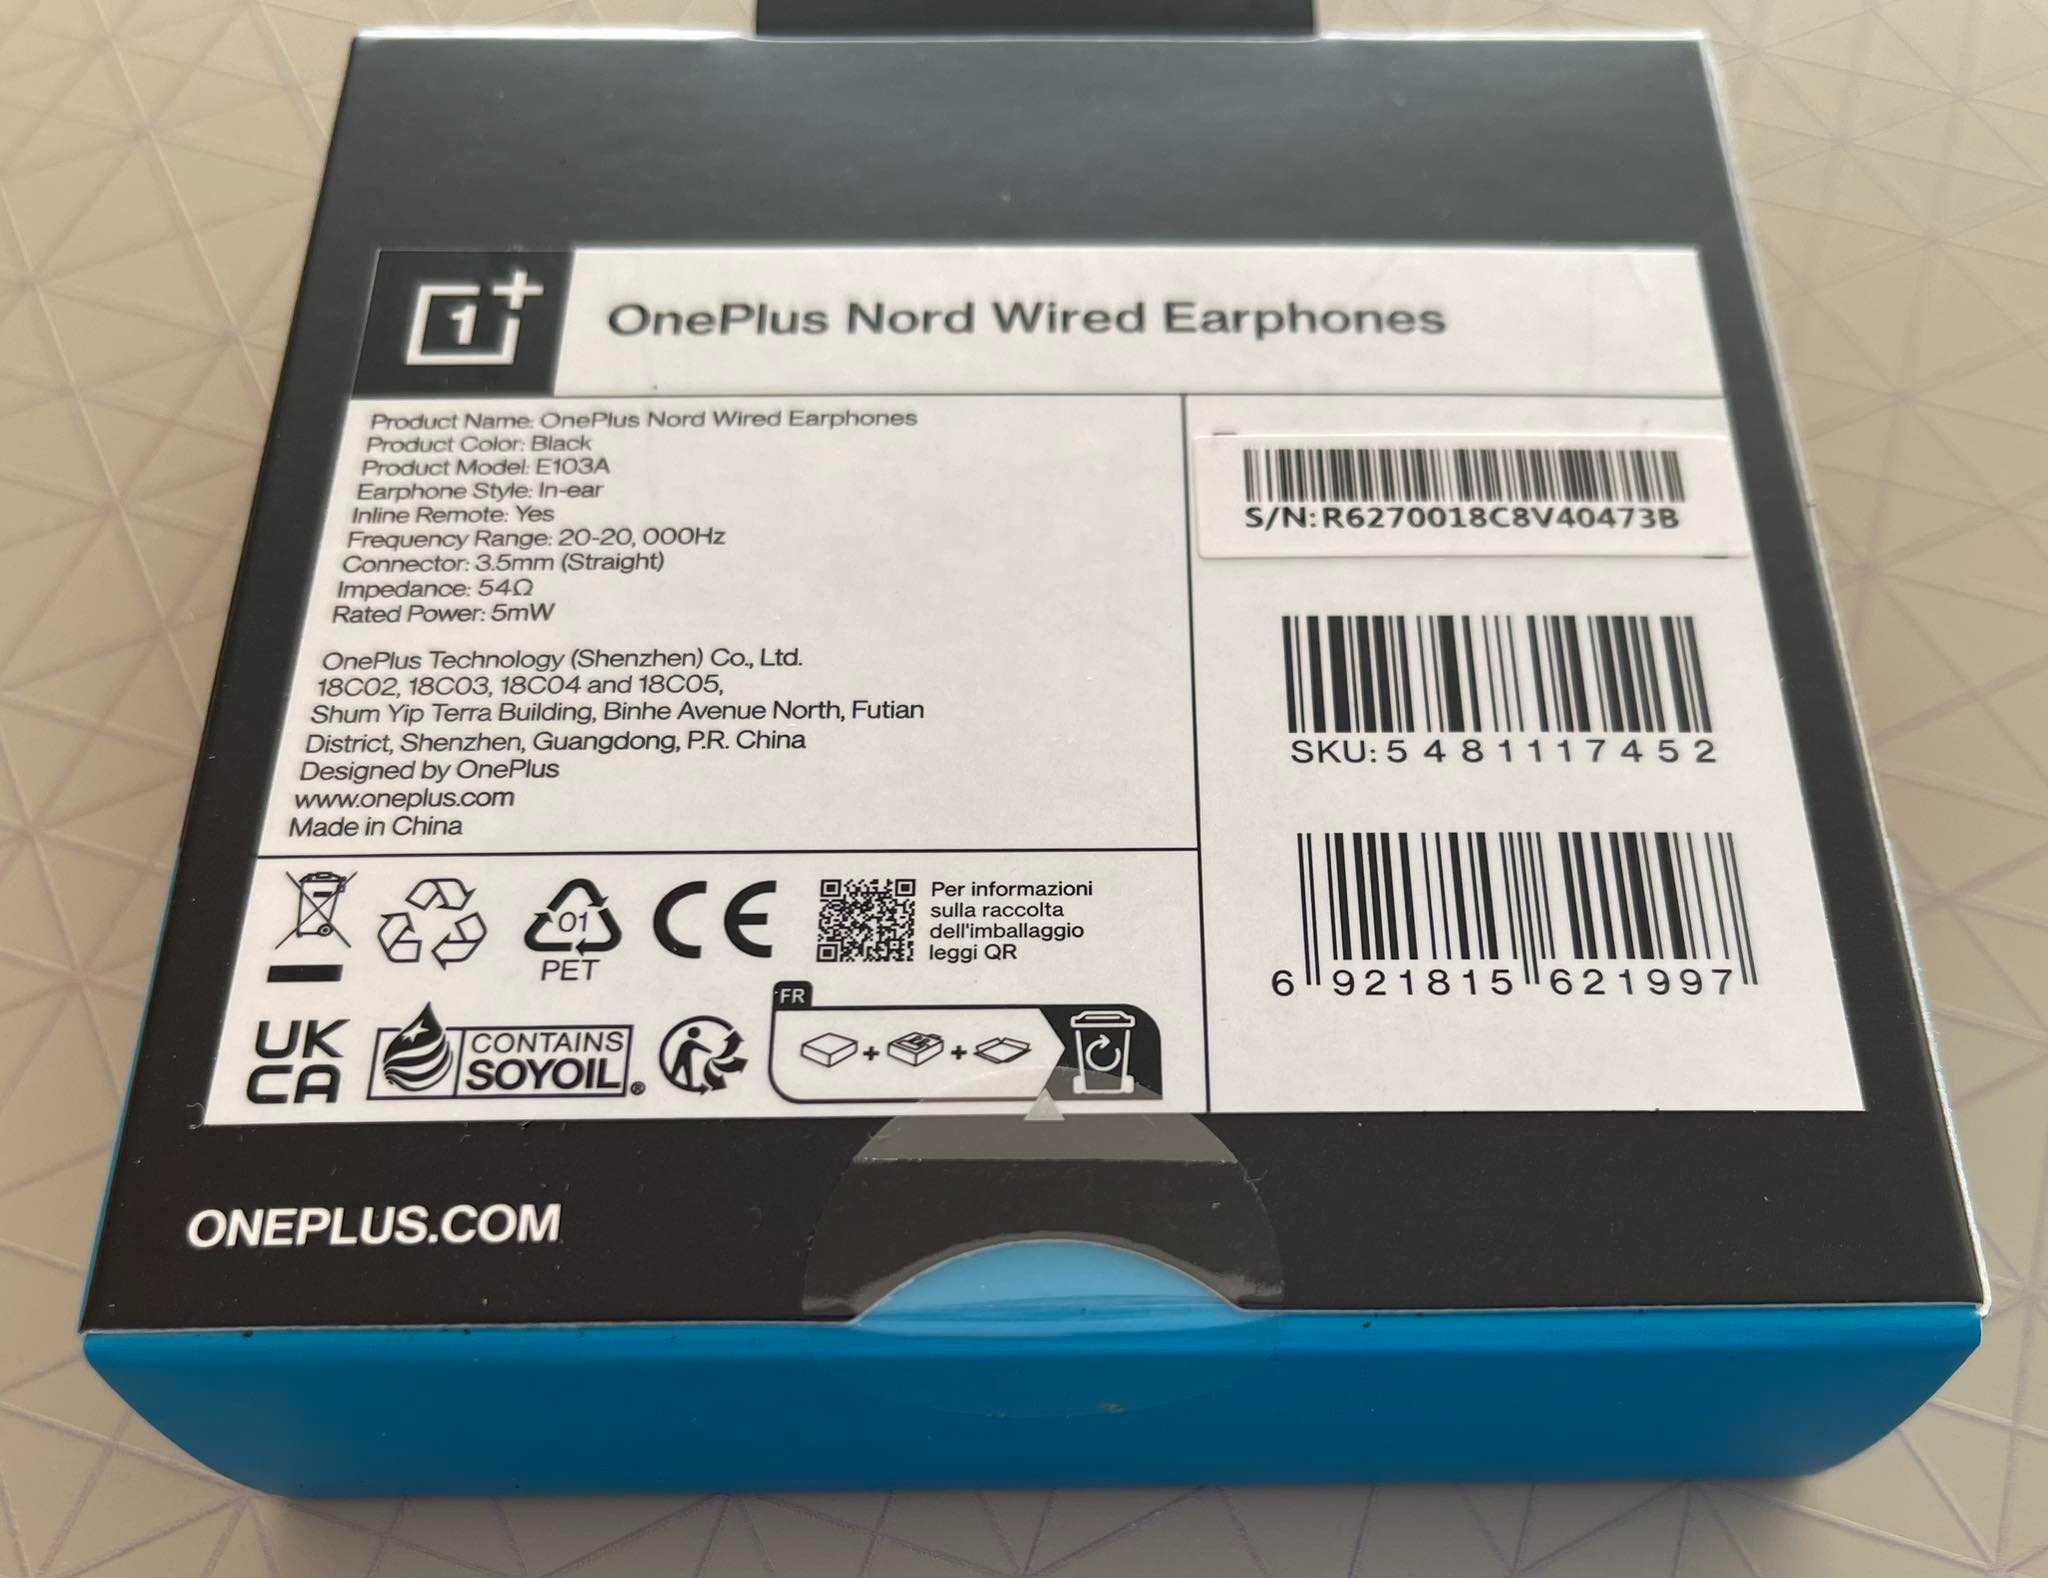 Auriculares One Plus Nord Wired - EM CAIXA SELADA